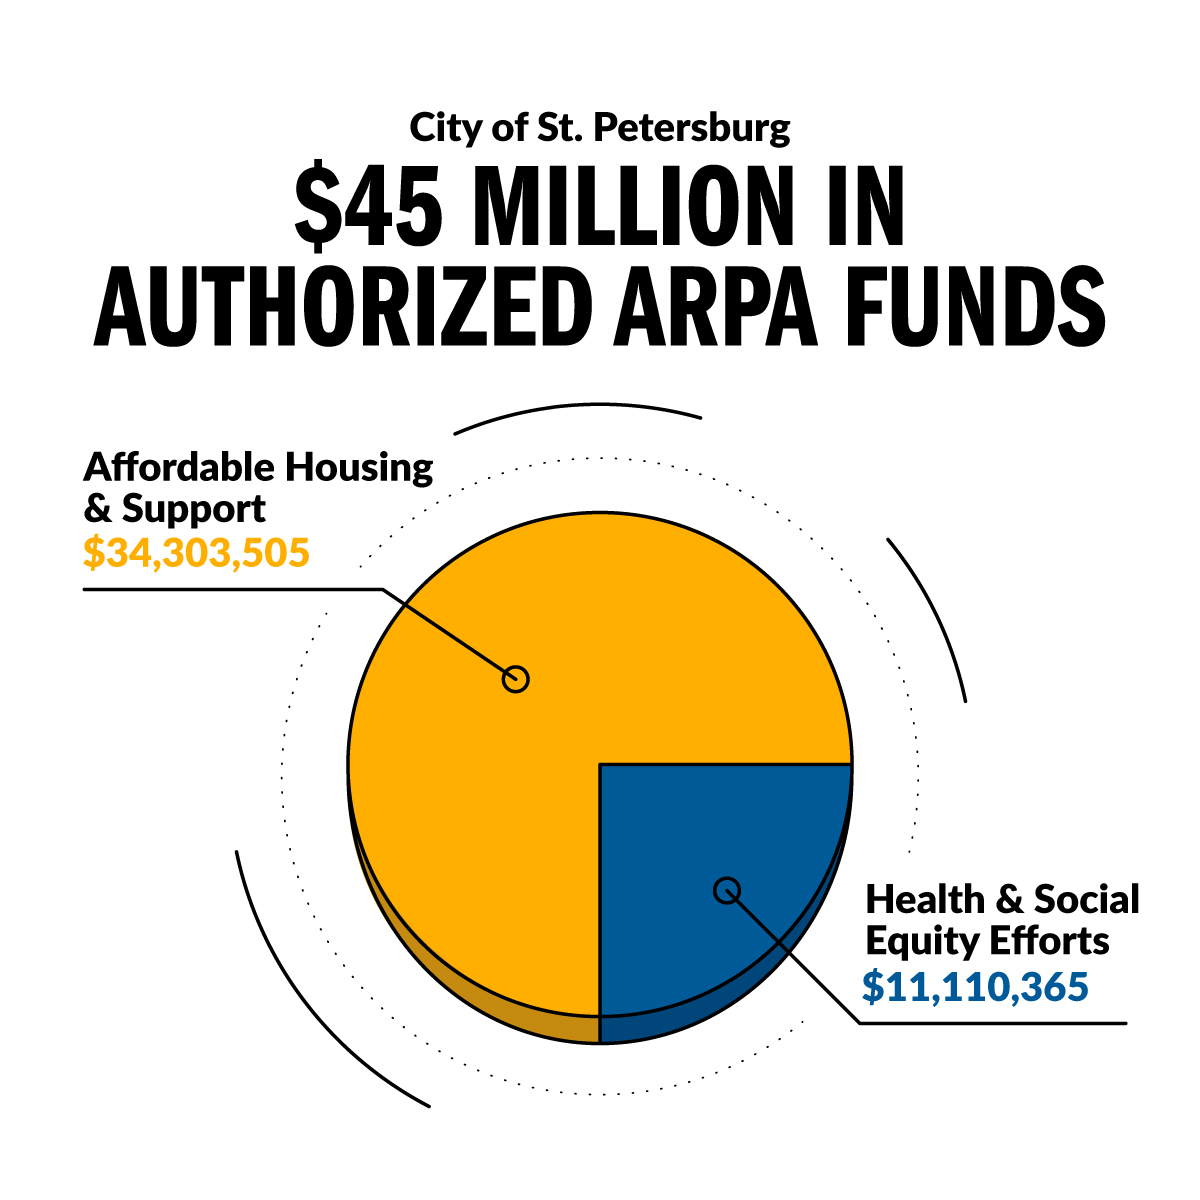 graph of ARPA Funds spent - $34,303,505 in Affordable Housing and support and $11,110,365 in health and social equity efforts